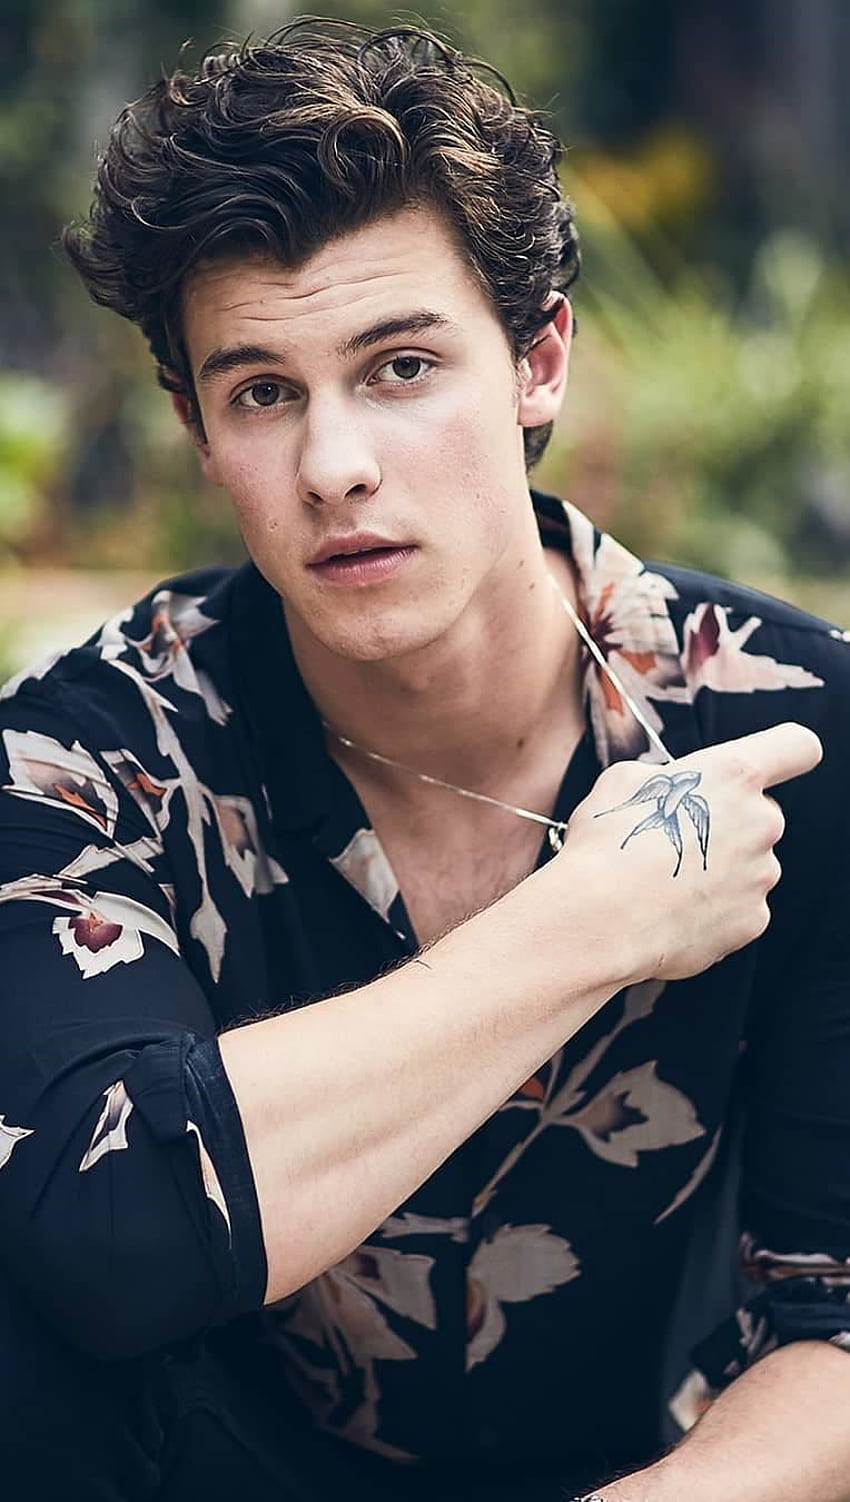 290 Best Shawn Mendes Wallpapers ideas  shawn mendes wallpaper shawn  mendes shawn